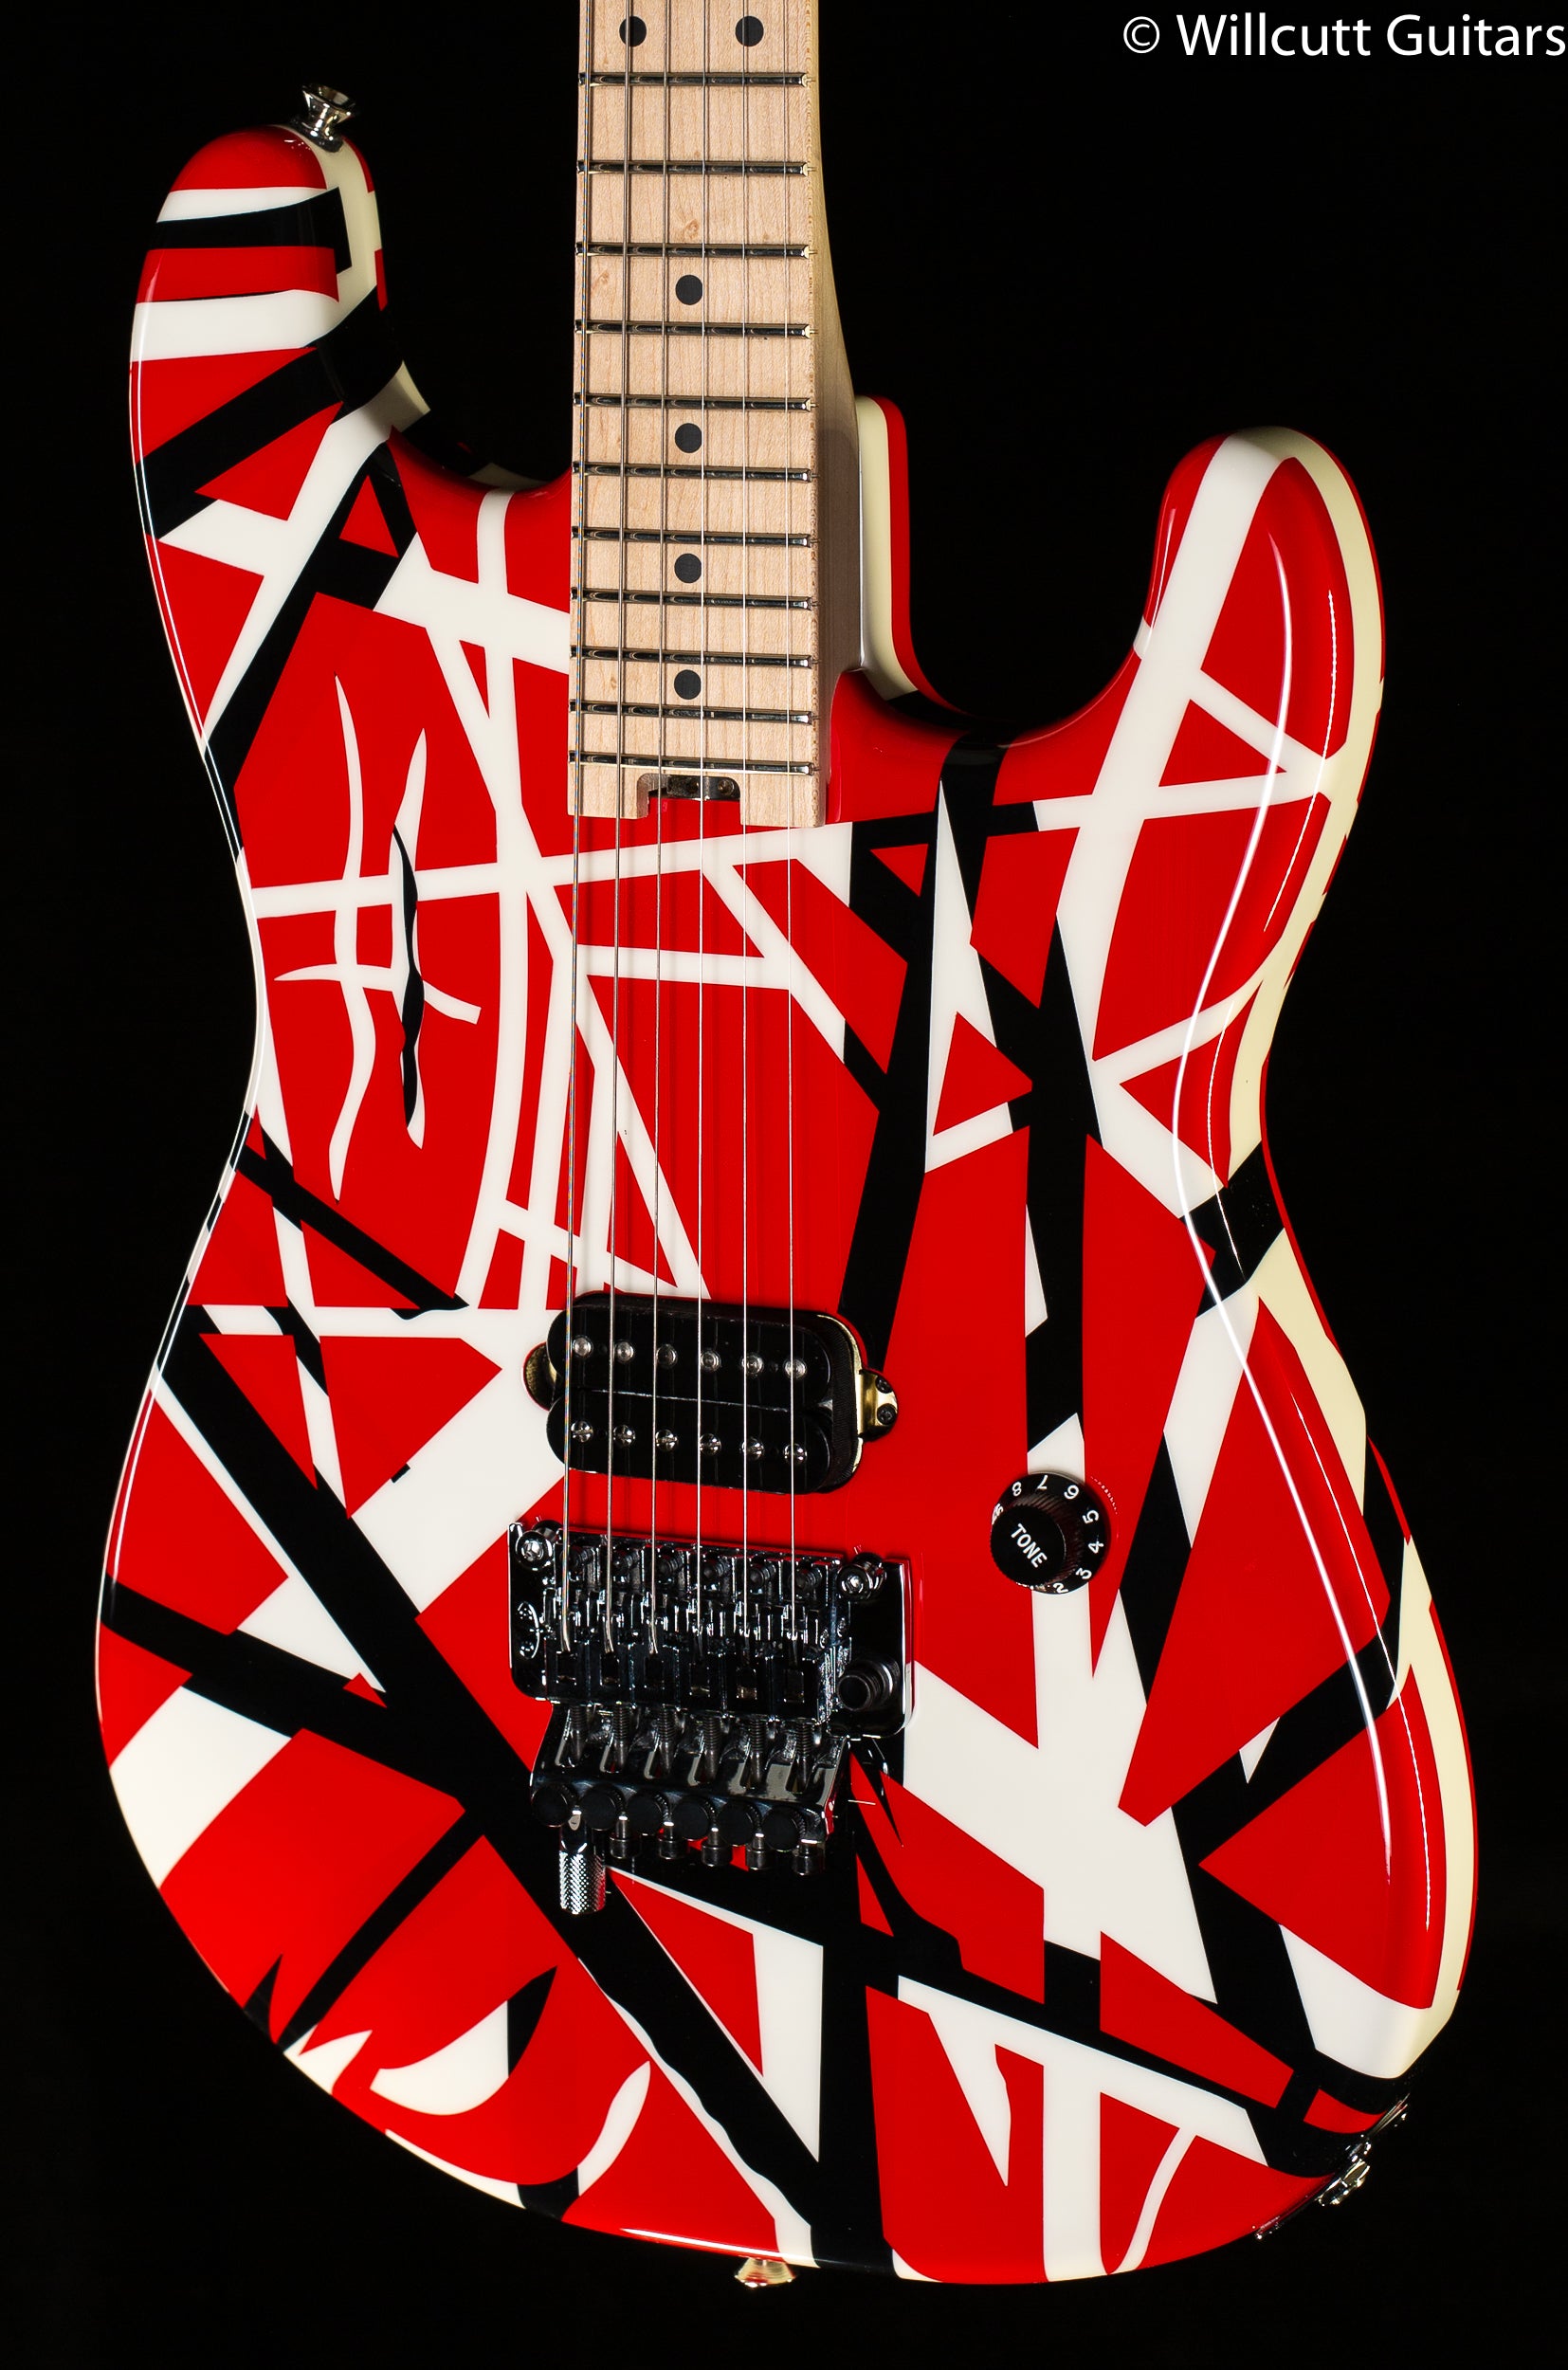 EVH Striped Series Red with Black Stripes (151) - Willcutt Guitars